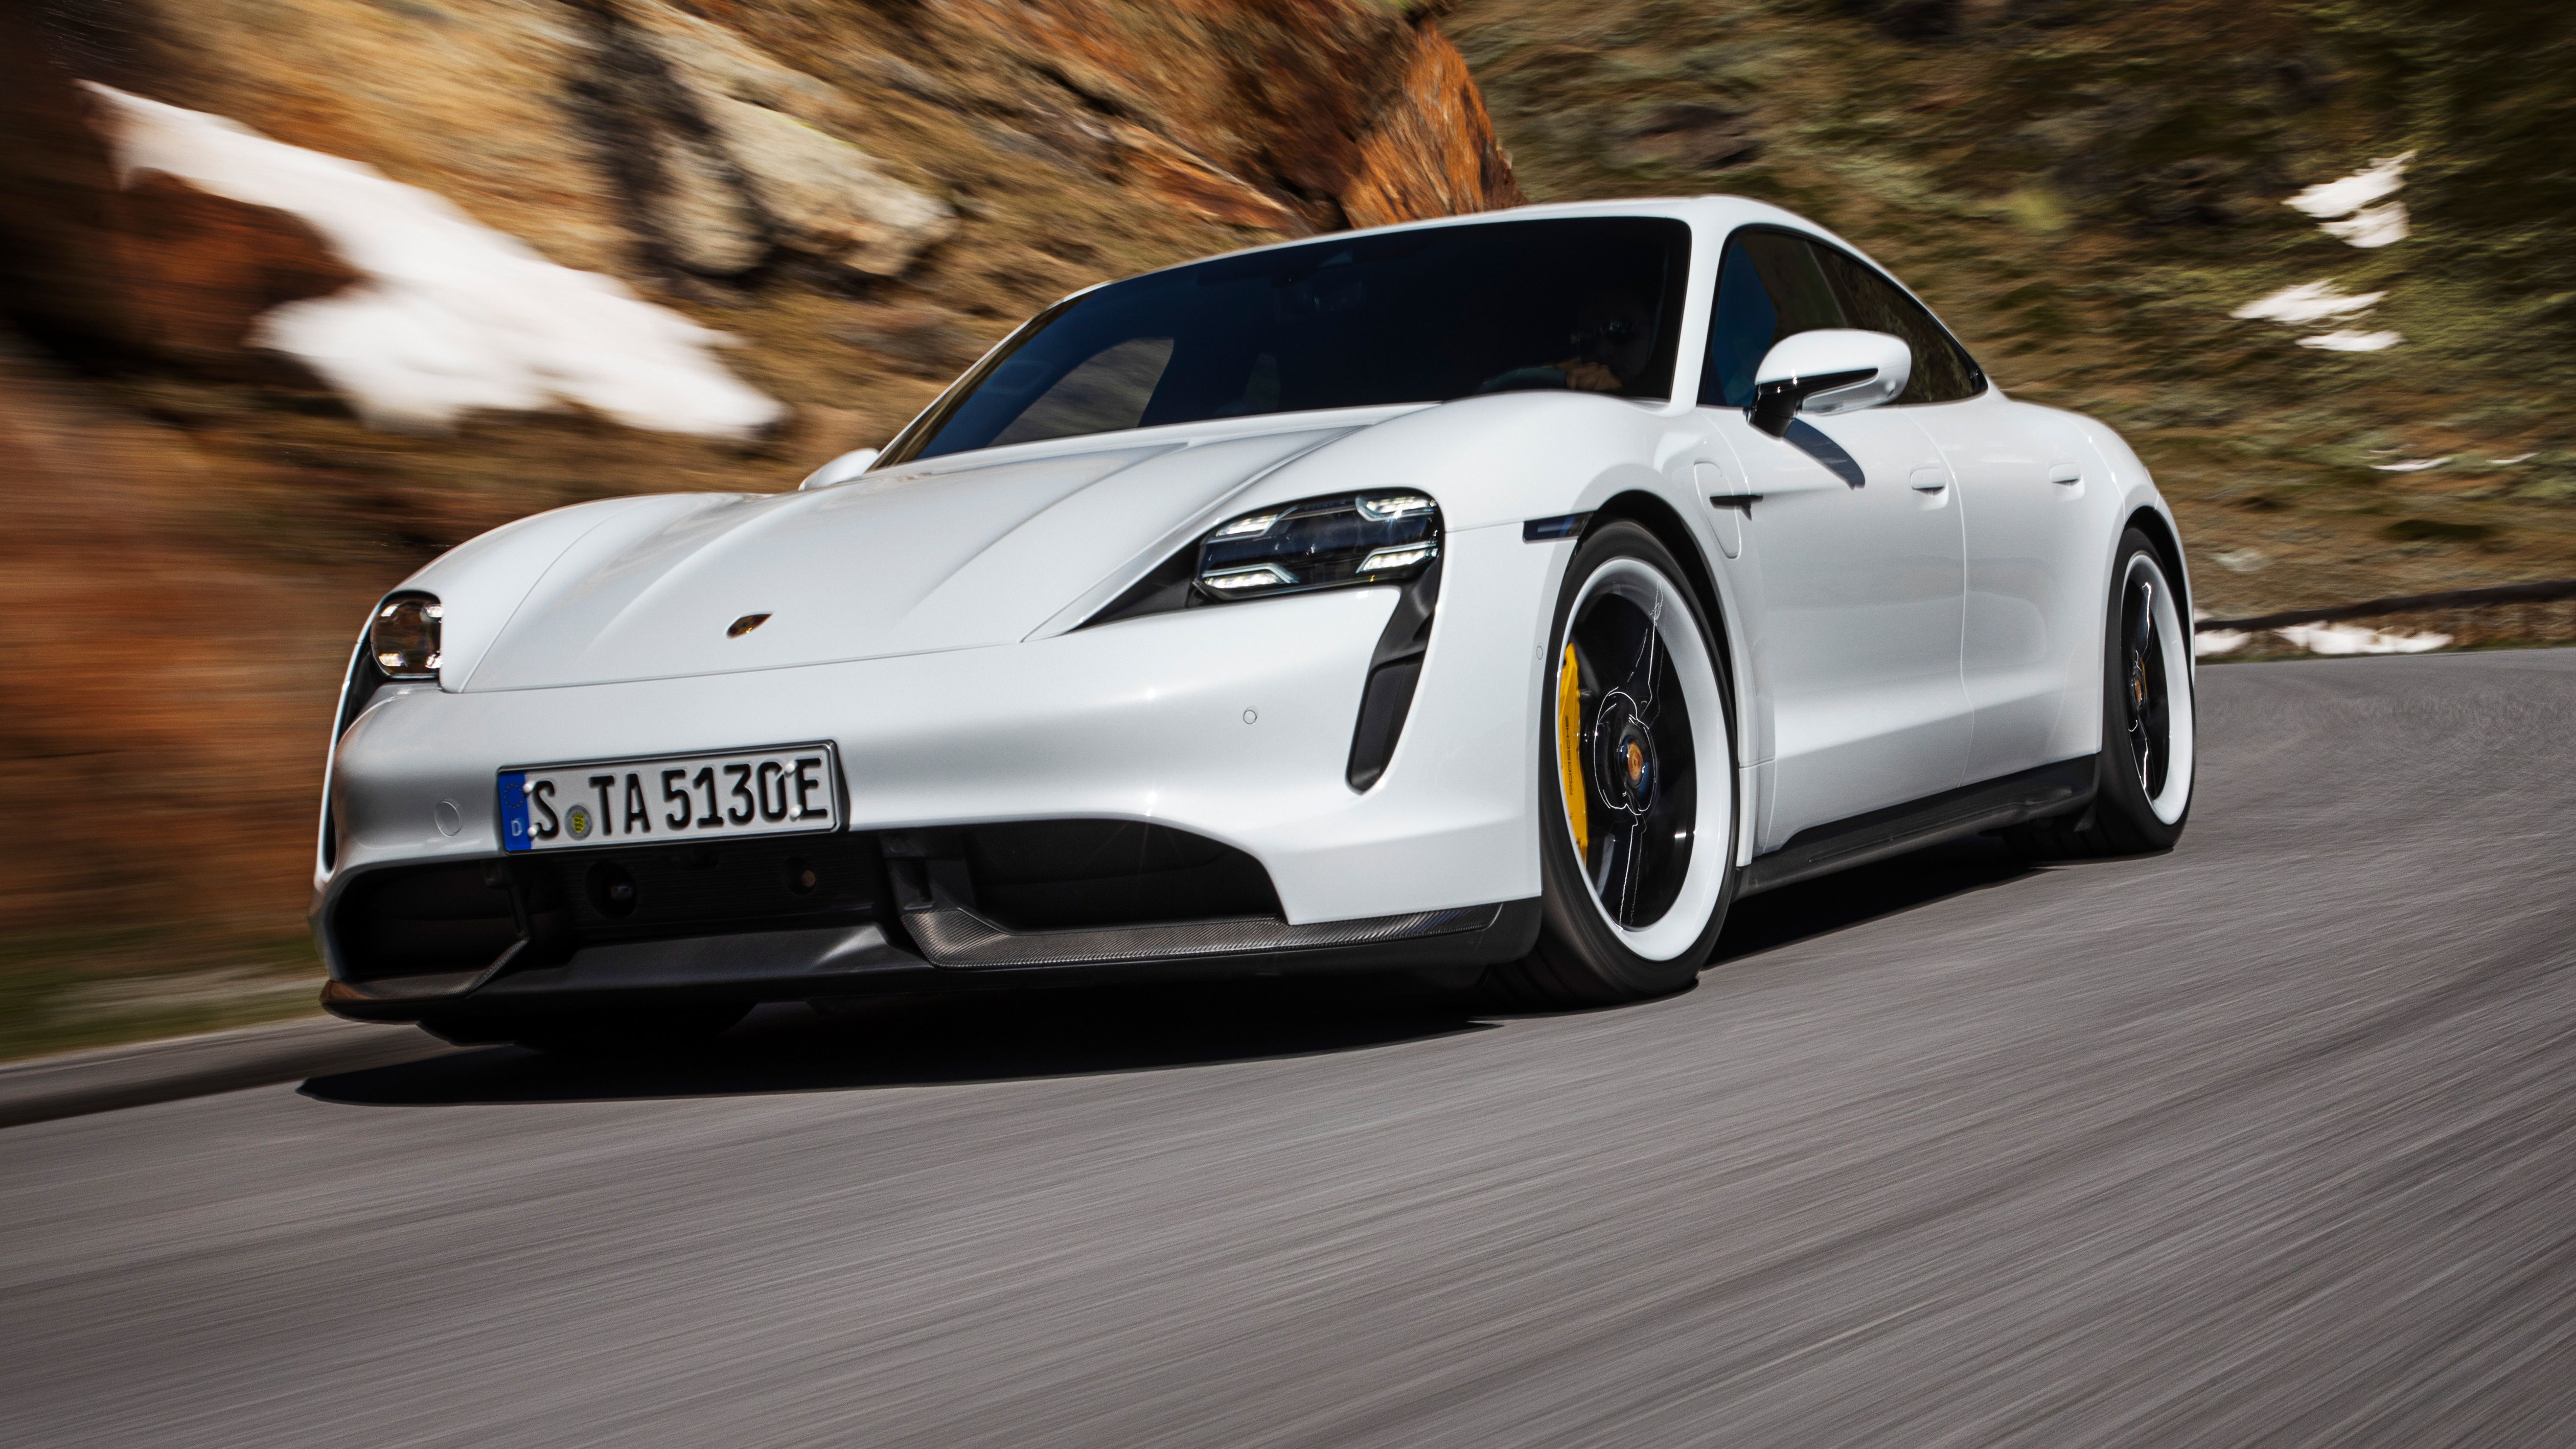 2020 Porsche Taycan Quirks and Features